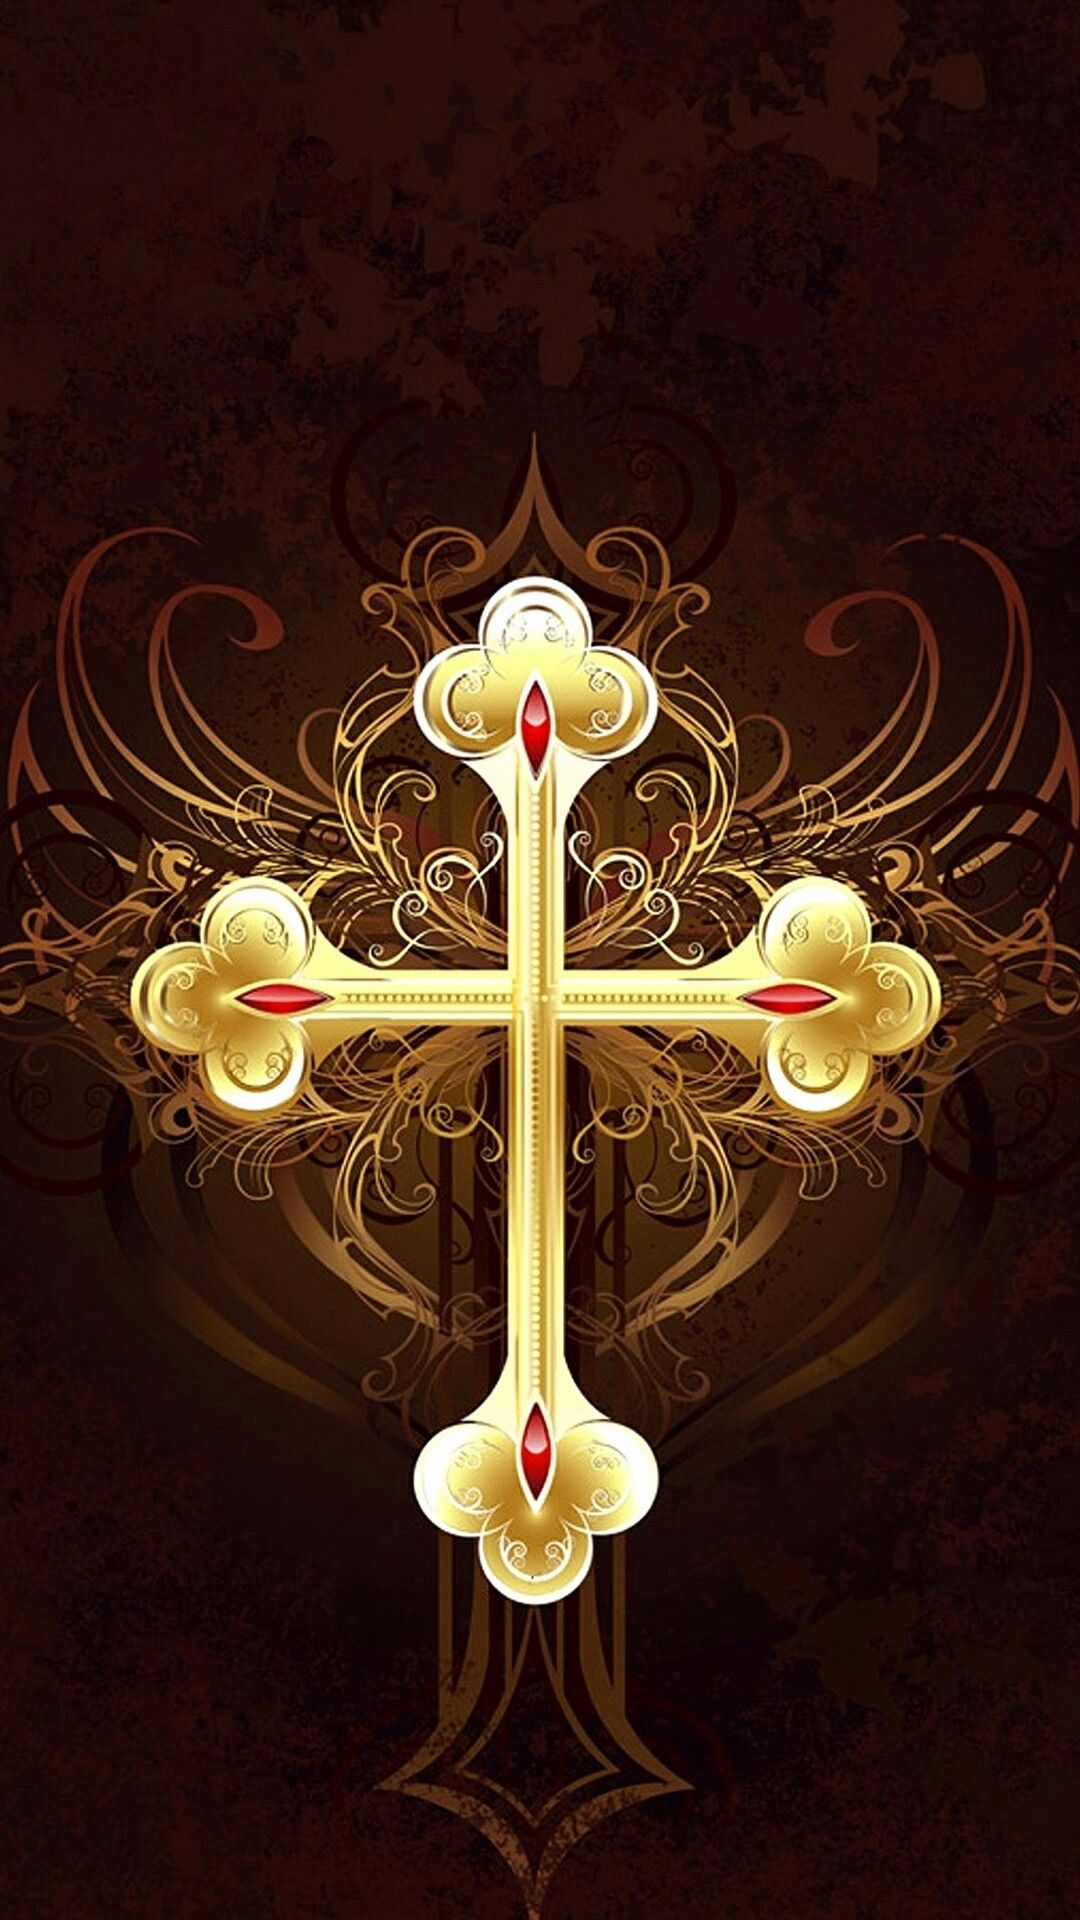 Golden Cross wallpaper for iPhone and Android. - Cross